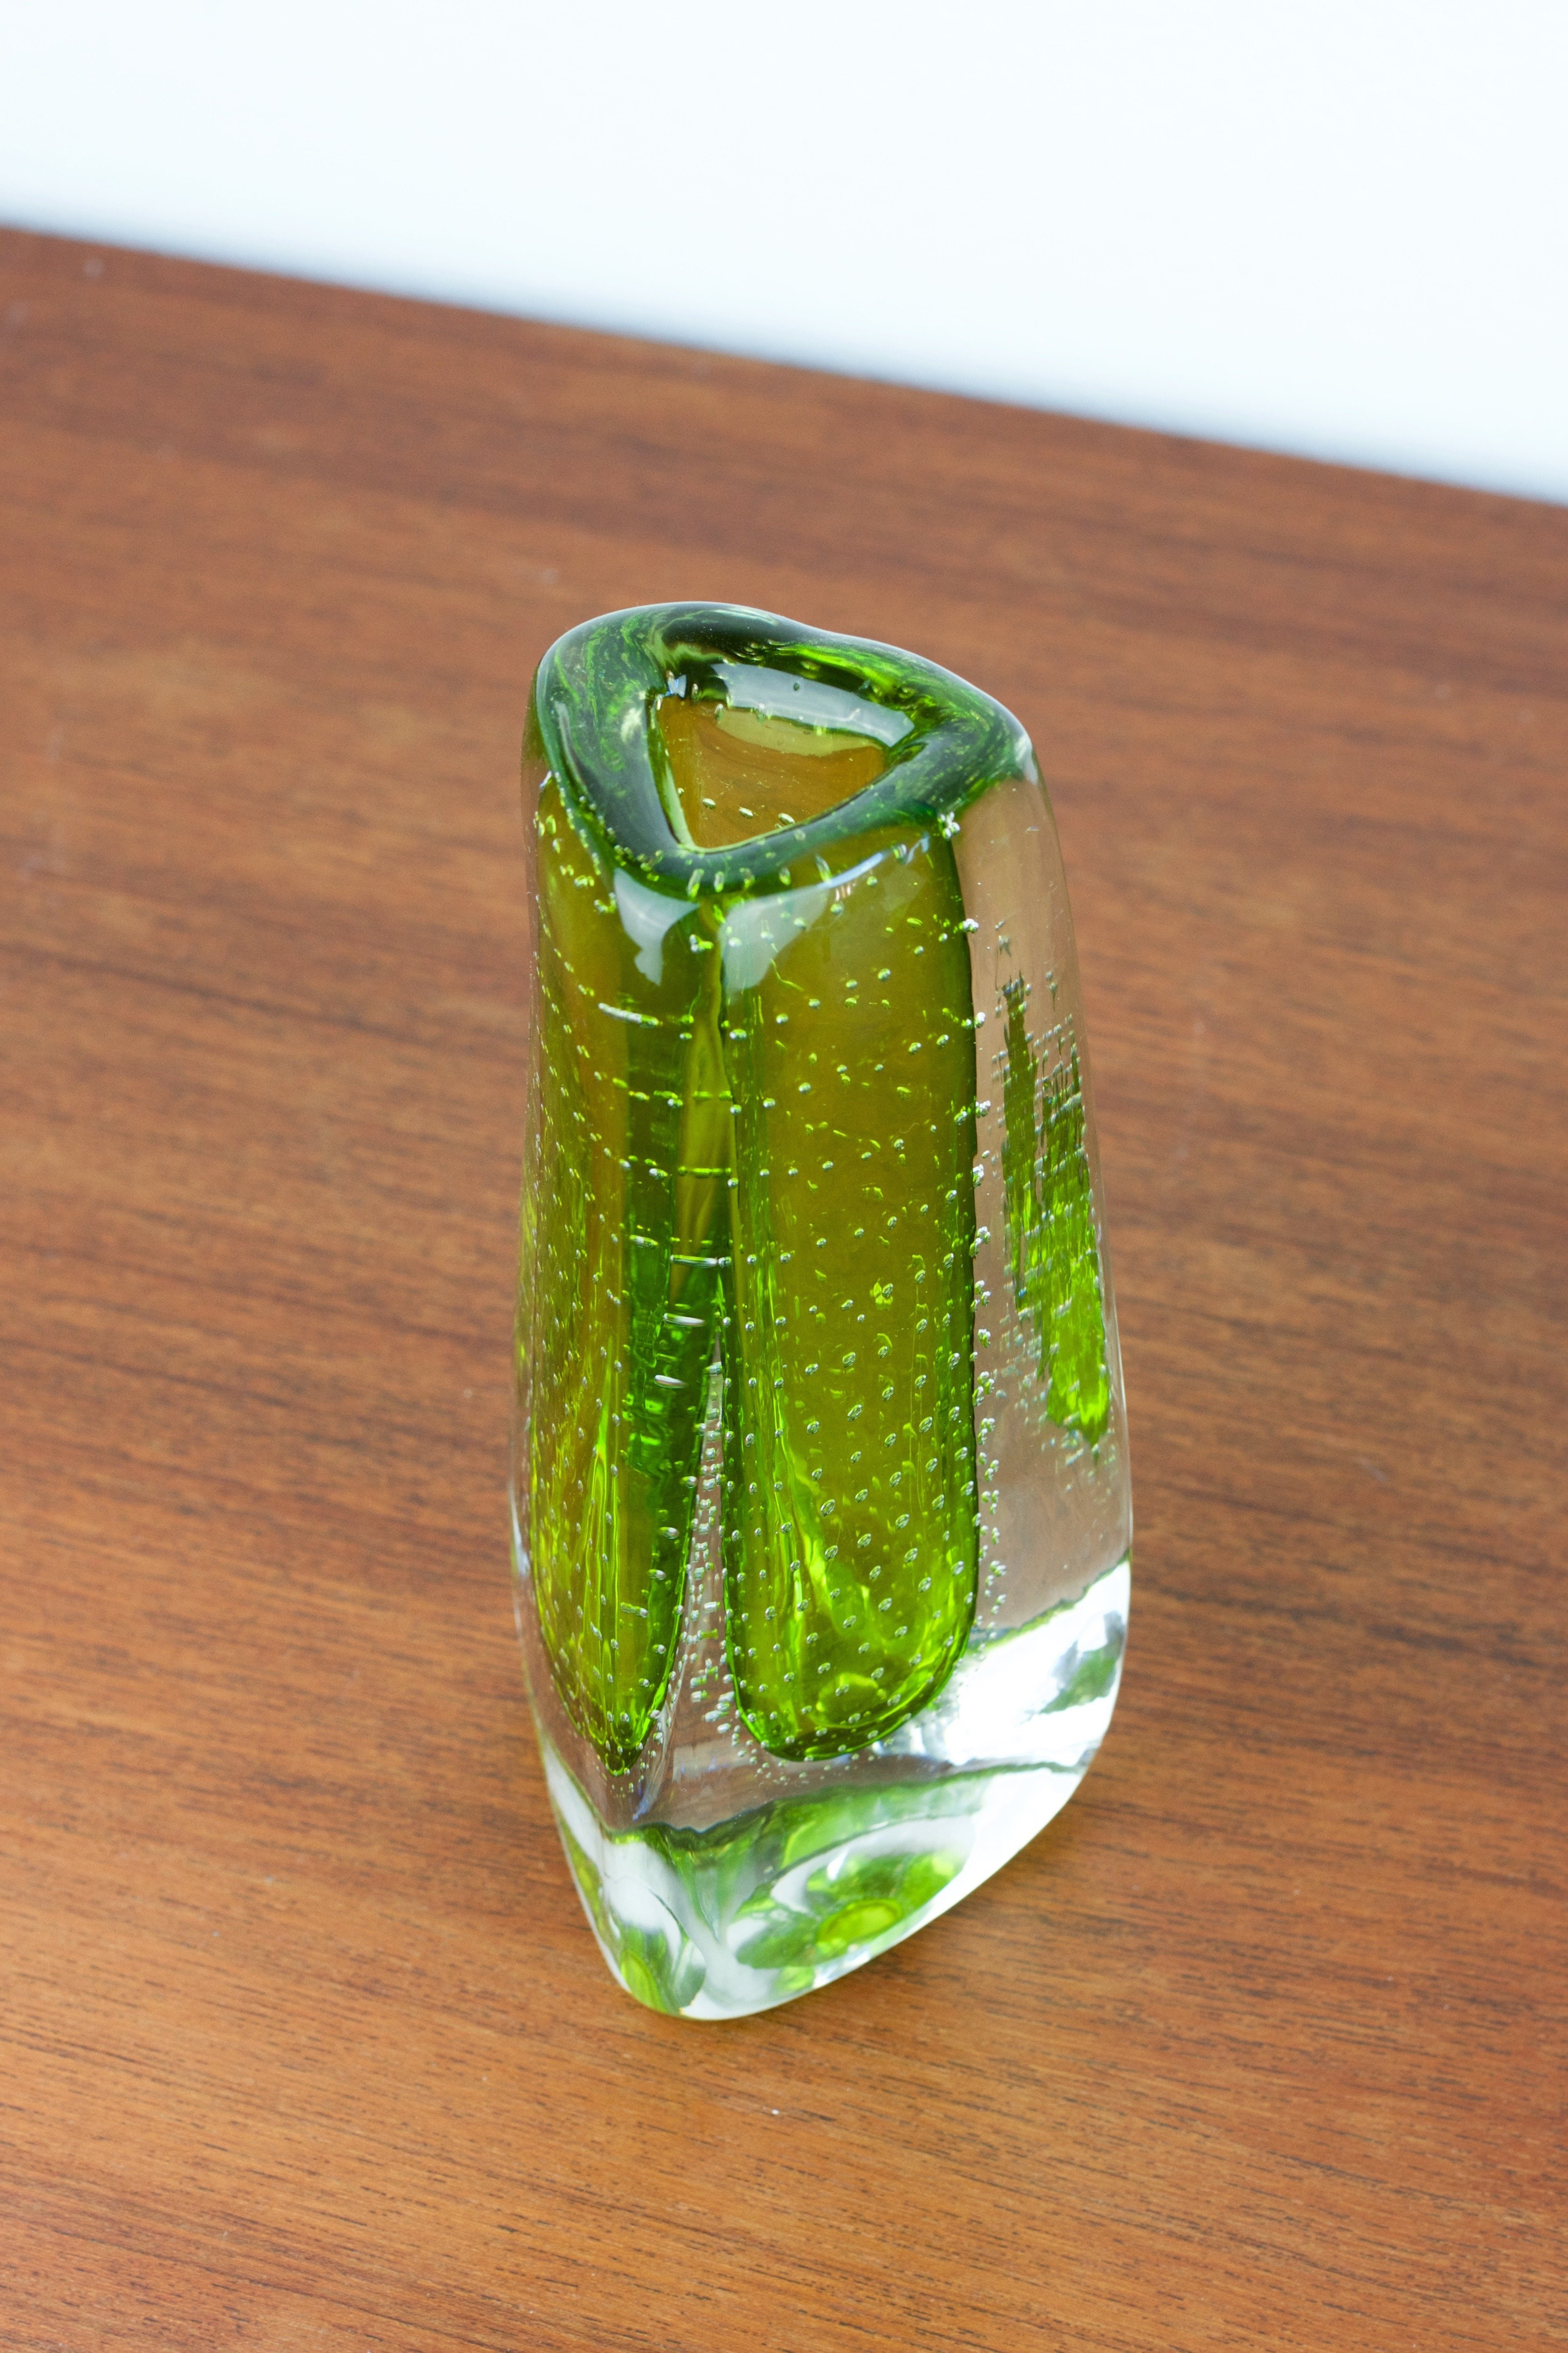 30 Lovable Amber Bubble Glass Vase 2024 free download amber bubble glass vase of large and heavy 1970s german emerald green bubble ice glass vase within large and heavy 1970s german emerald green bubble ice glass vase theresienthal at 1stdibs